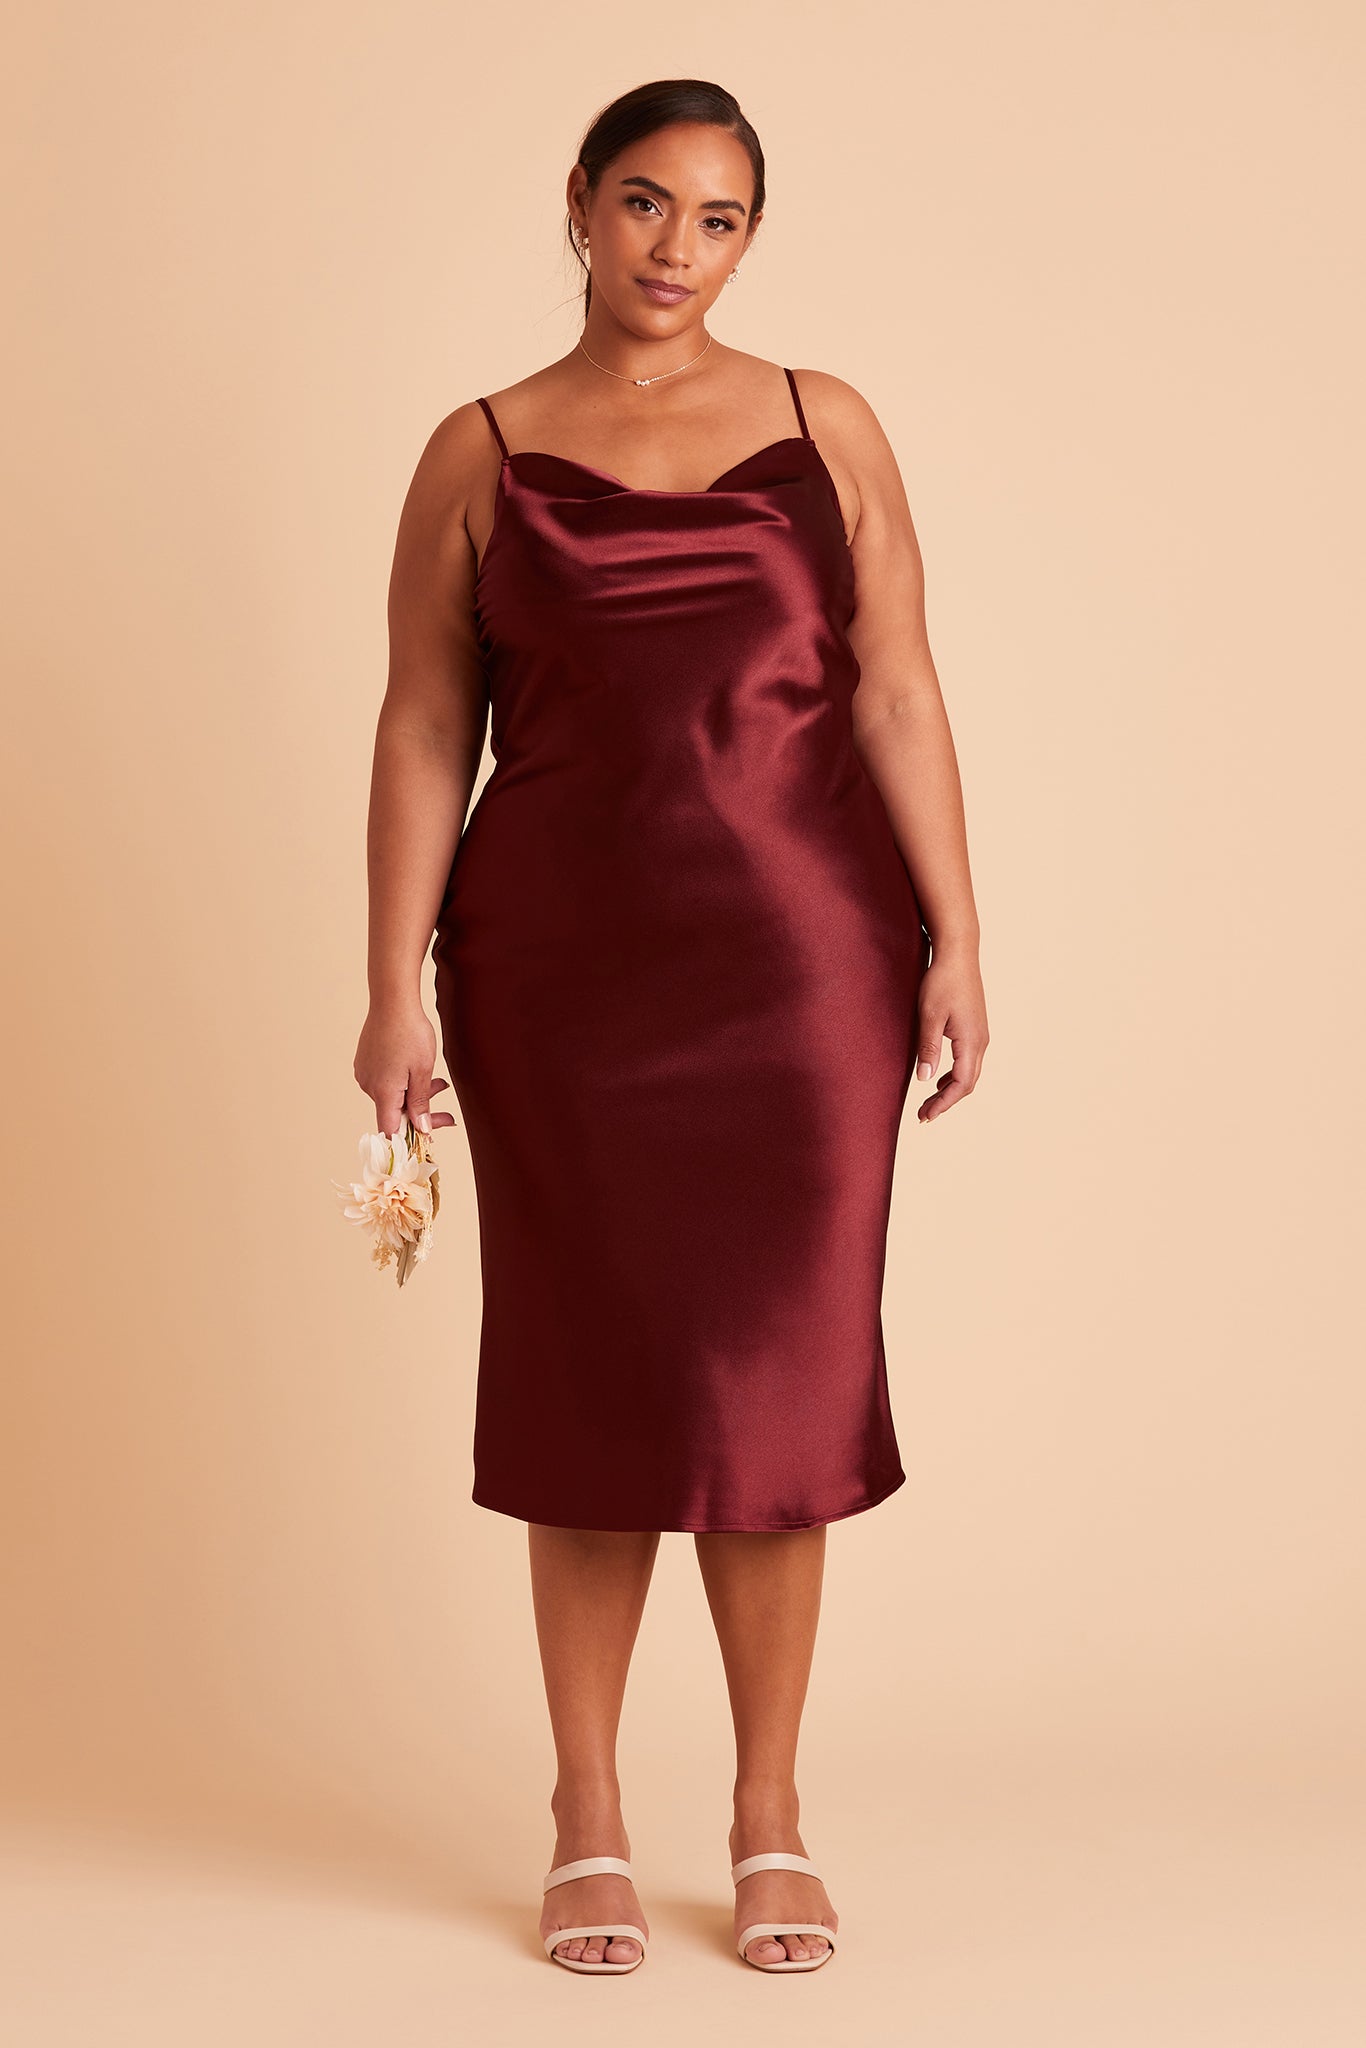 Lisa midi plus size bridesmaid dress in cabernet satin by Birdy Grey, front view